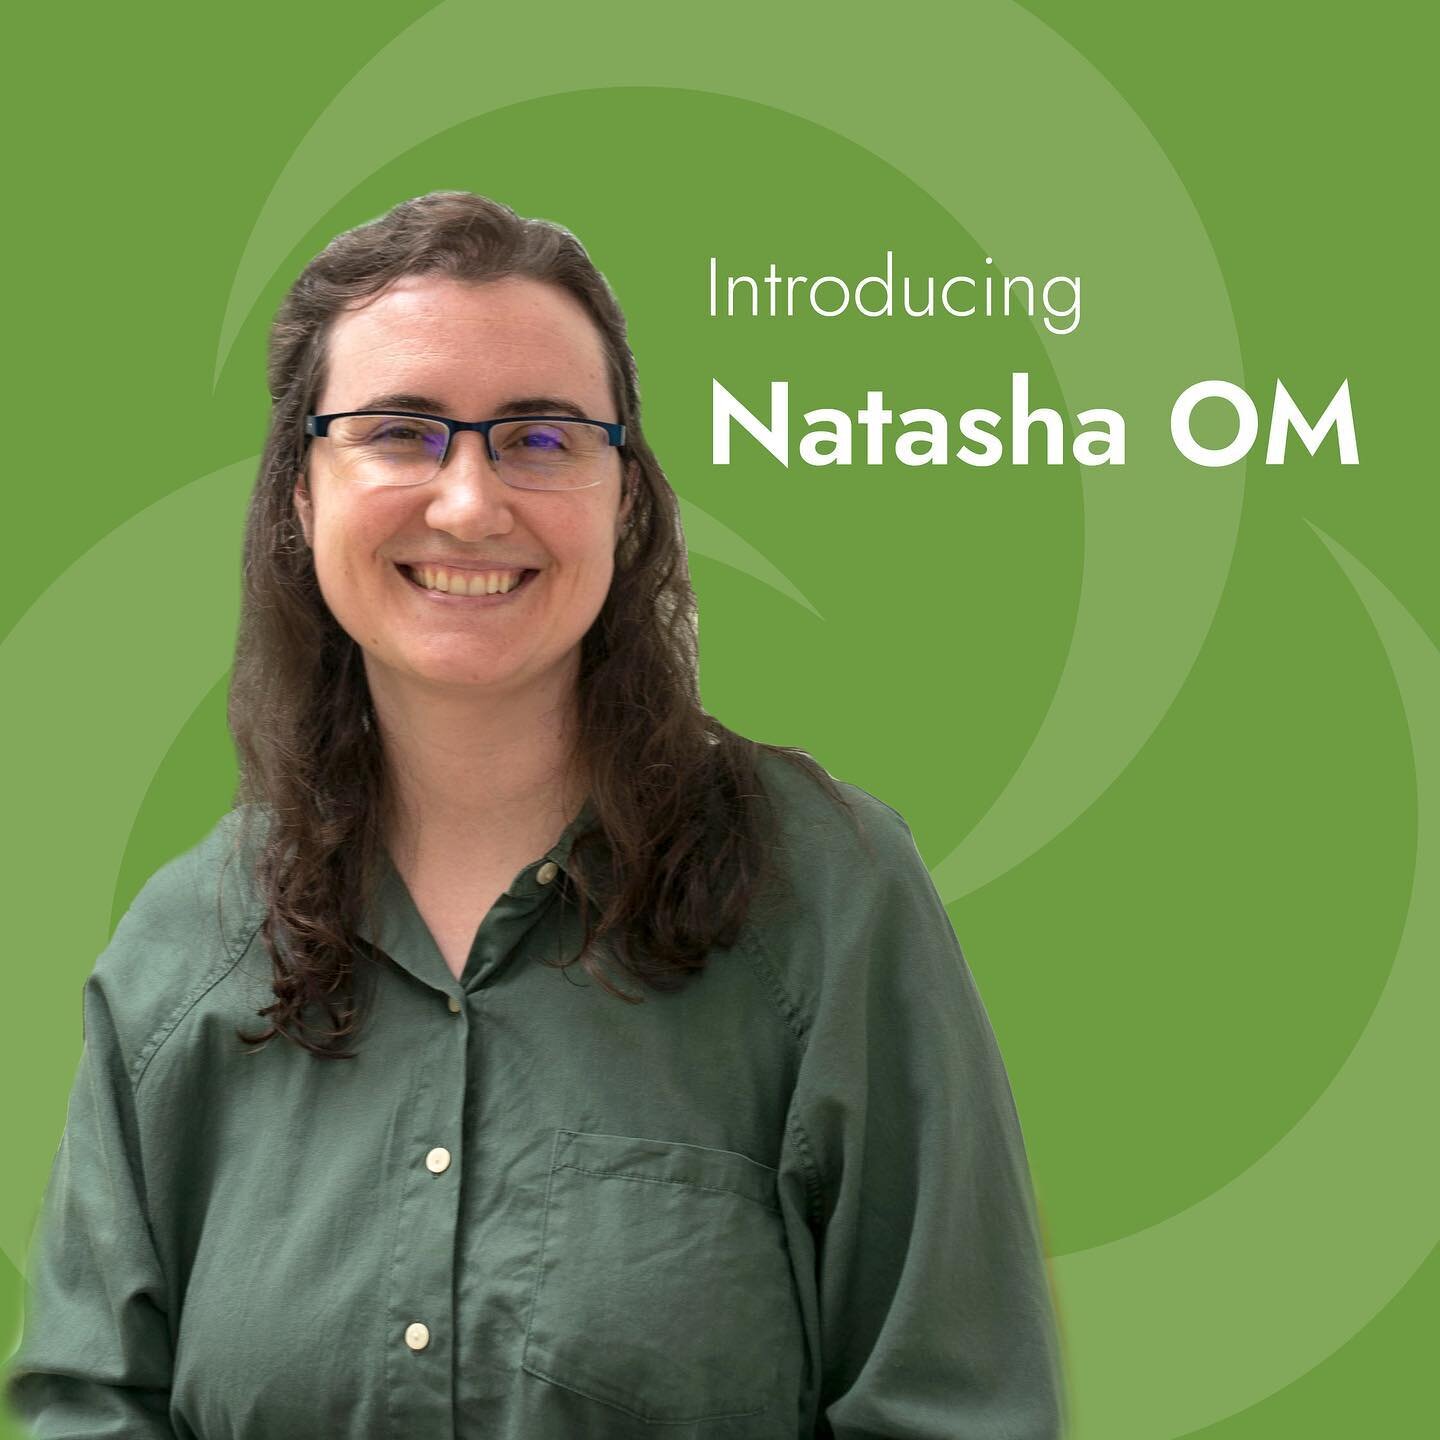 Meet the team featuring: Natasha OM 🌱

Natasha is the newest member of the 3CE team joining just this past December. She brings over 5 years of experience with a diverse skill set in power, telecommunications, lighting, and photovoltaic solar system